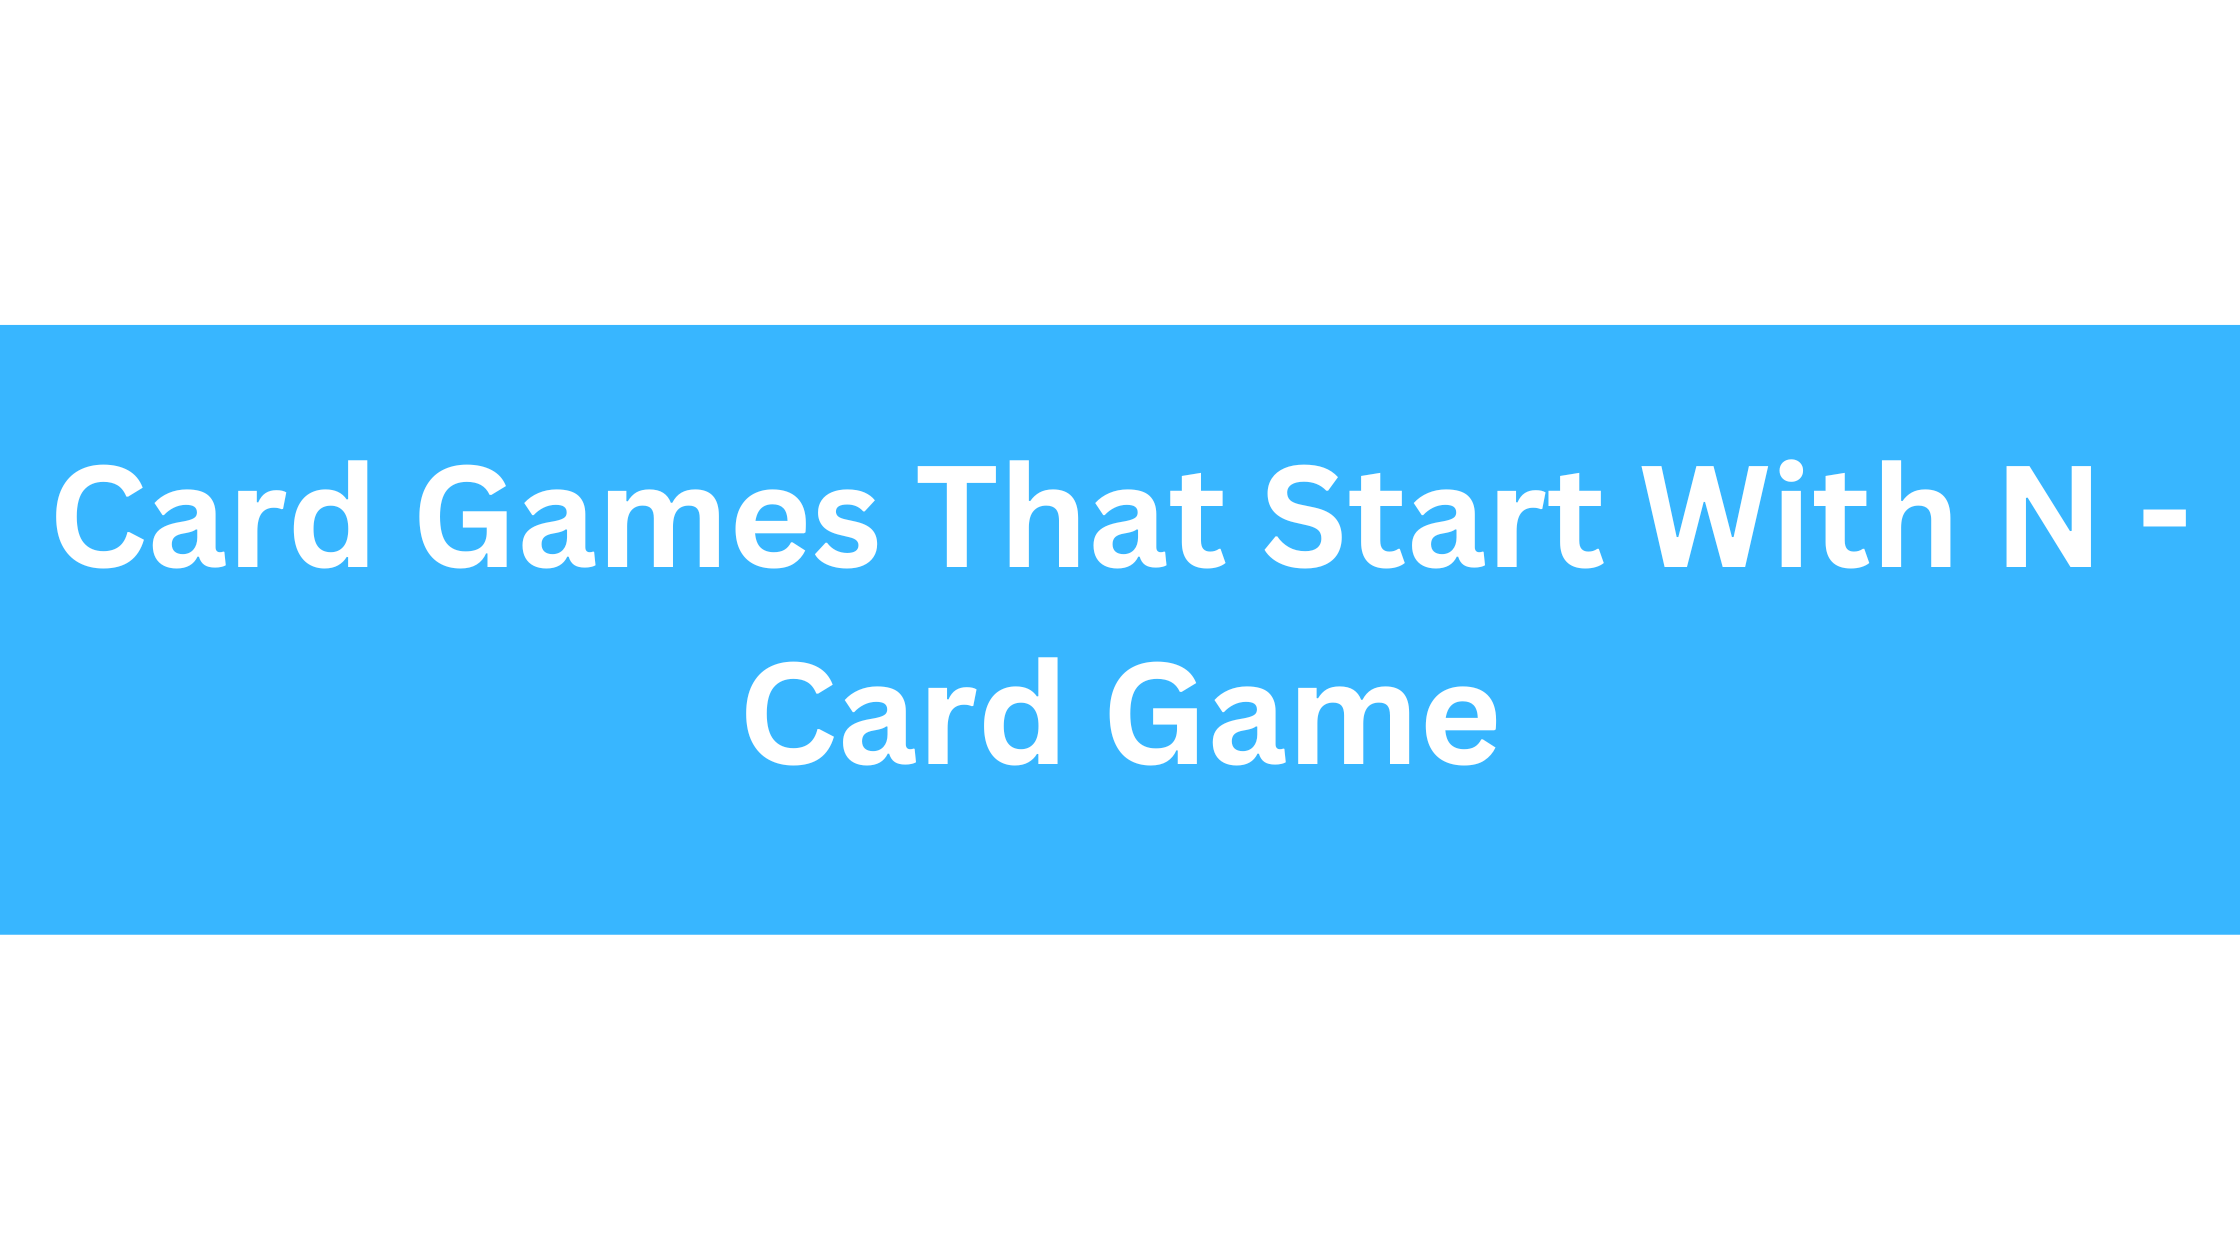 Card Games That Start With N